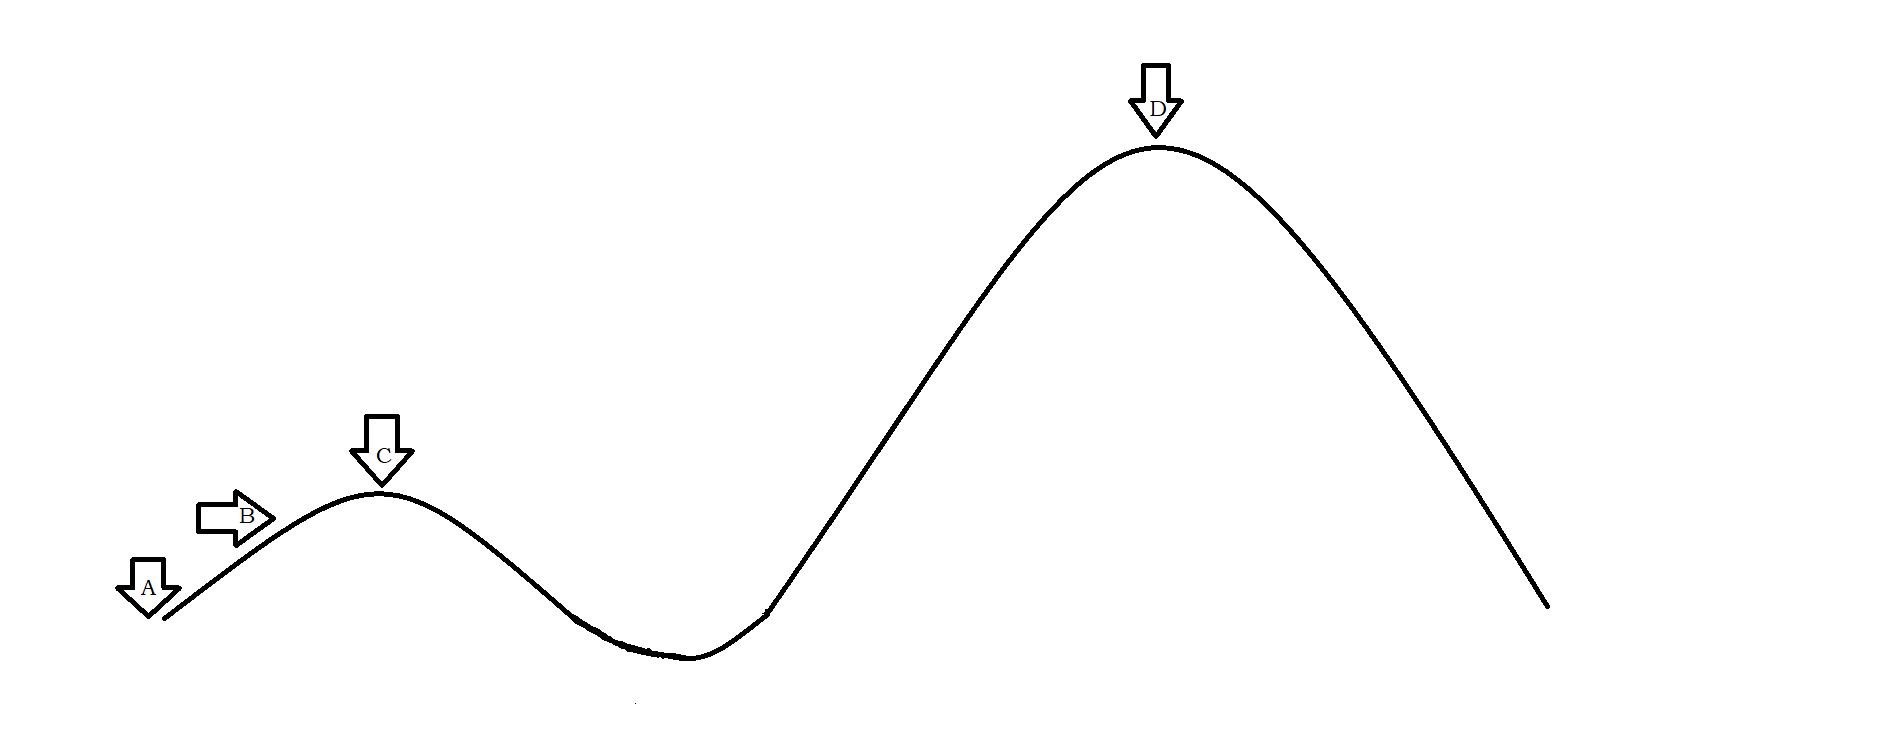 hill climbing algorithm picture with 2 hills